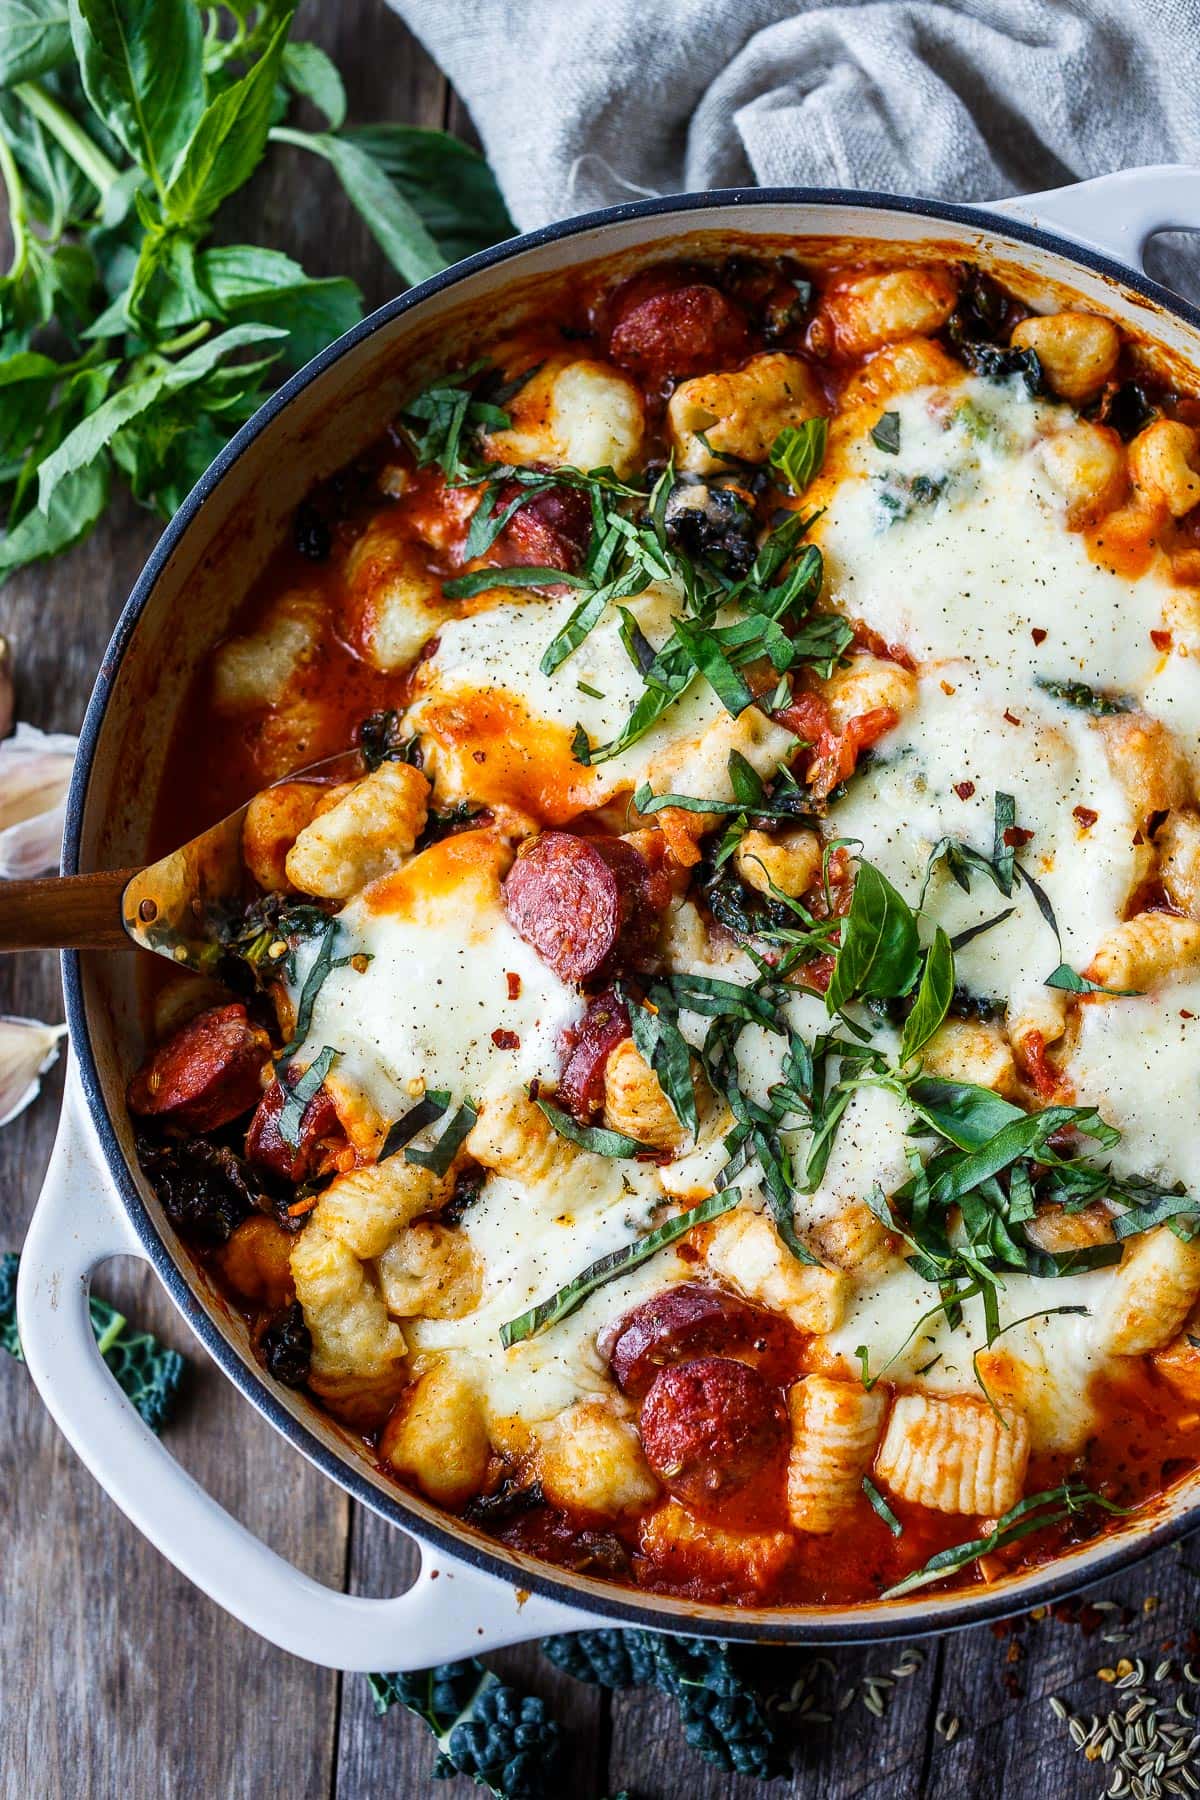 Baked Gnocchi with tomato sauce, kale, Italian sausage and melty mozzarella cheese - a delicious one-pan meal that can be made in 30 minutes.